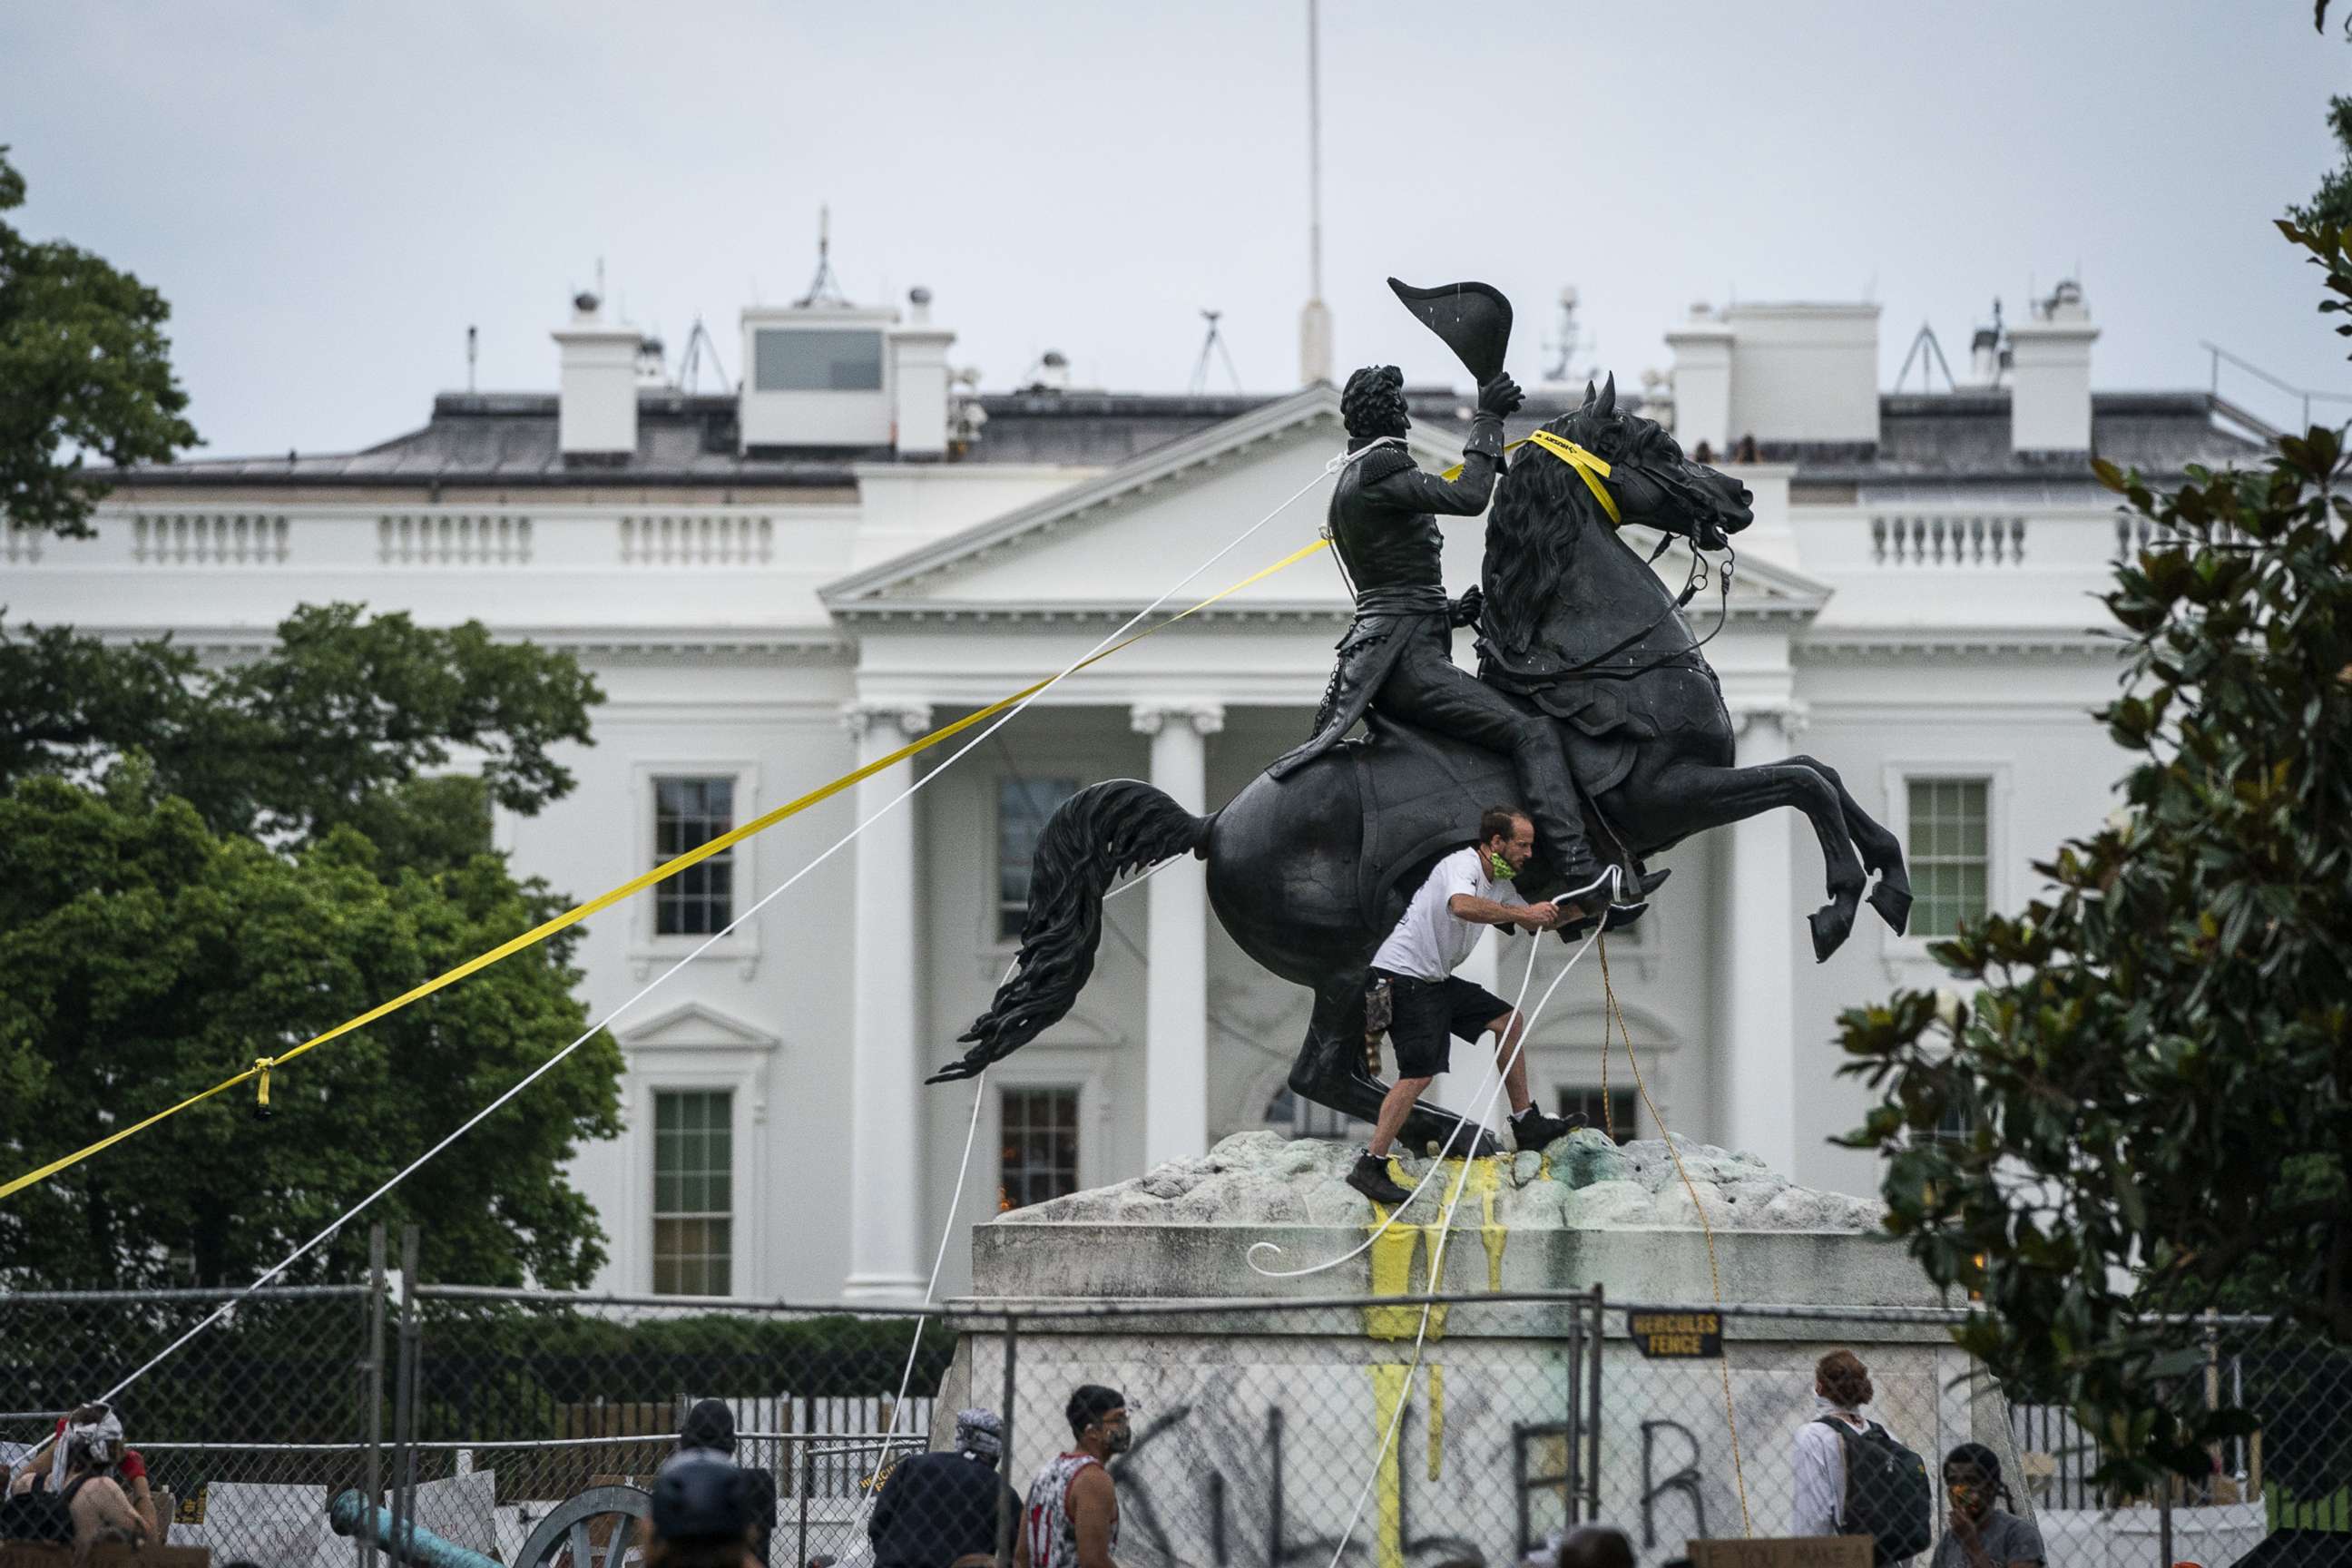 PHOTO: Protesters attempt to pull down the statue of Andrew Jackson in Lafayette Square near the White House on June 22, 2020, in Washington, DC.